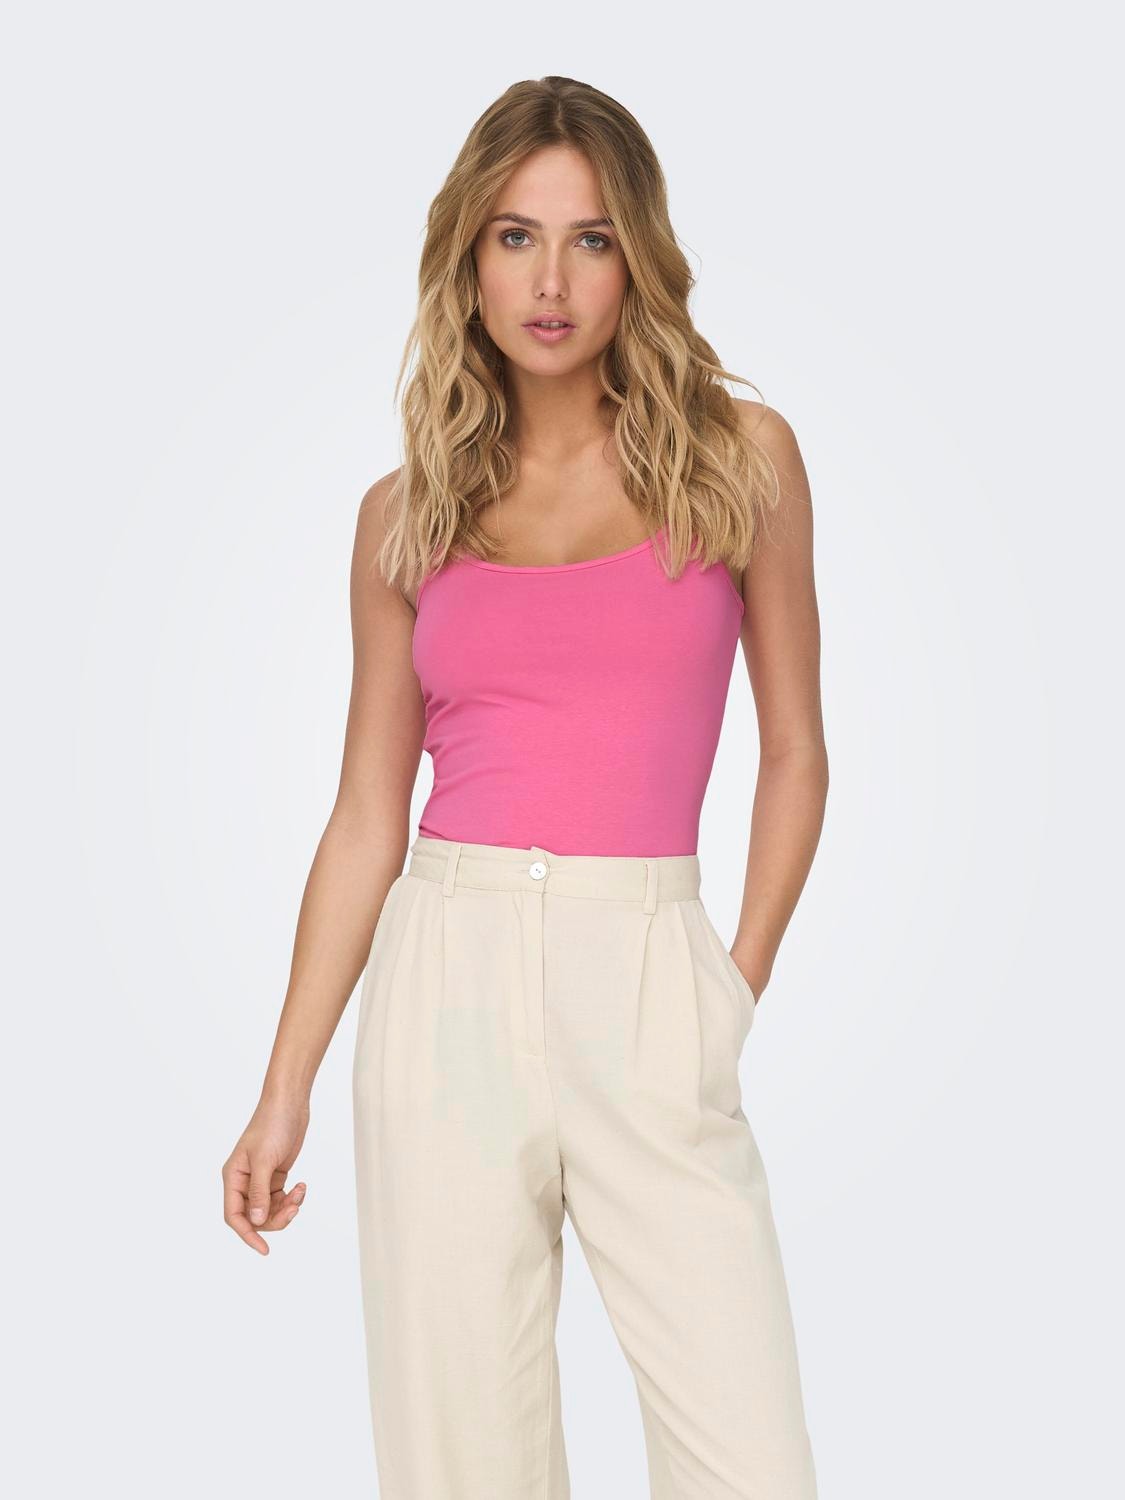 ONLY Effen Mouwloze top -Pink Power - 15148401